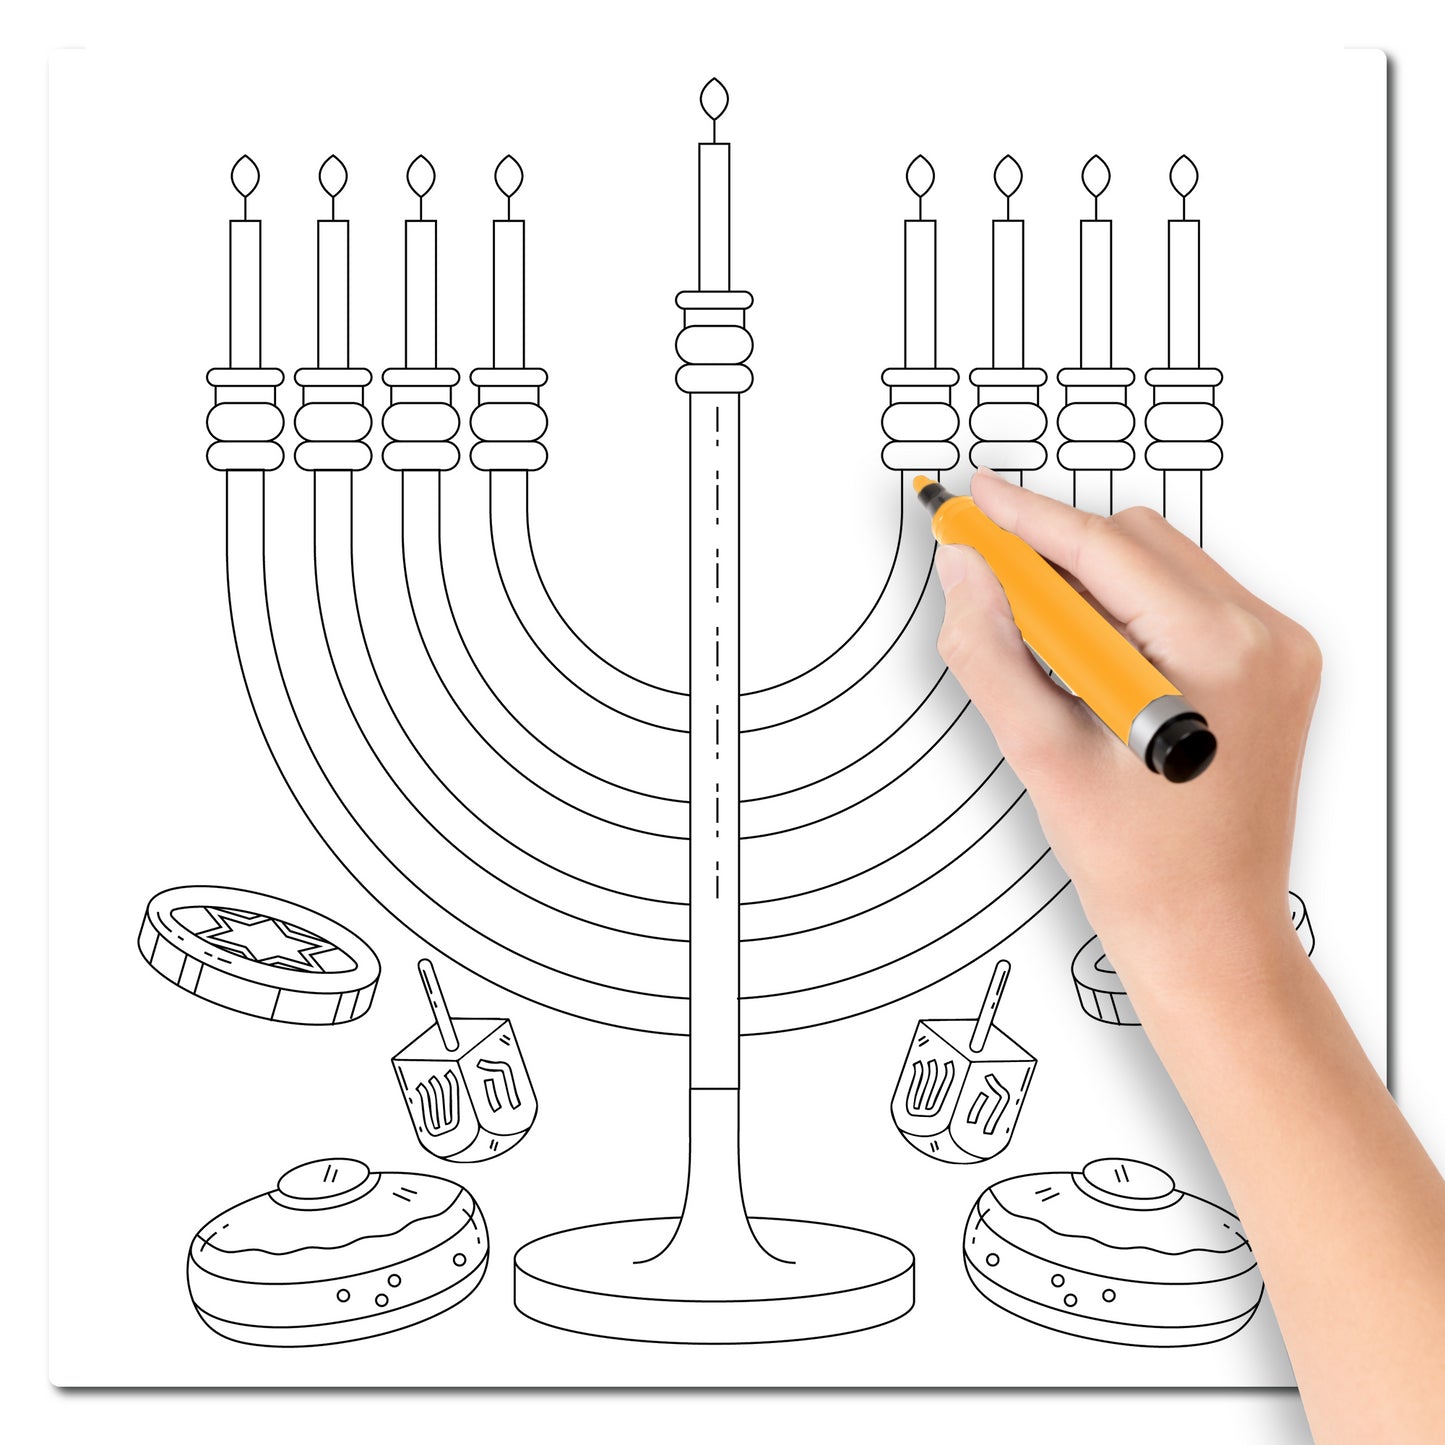 Magnet Me Up Color Your Own Hanukkah Star of David Menorah, DIY Coloring Holiday Magnet Decal for Chanukkah, 6x6 inch, Magen David Creative Artistic Gift Idea, Perfect for Kids